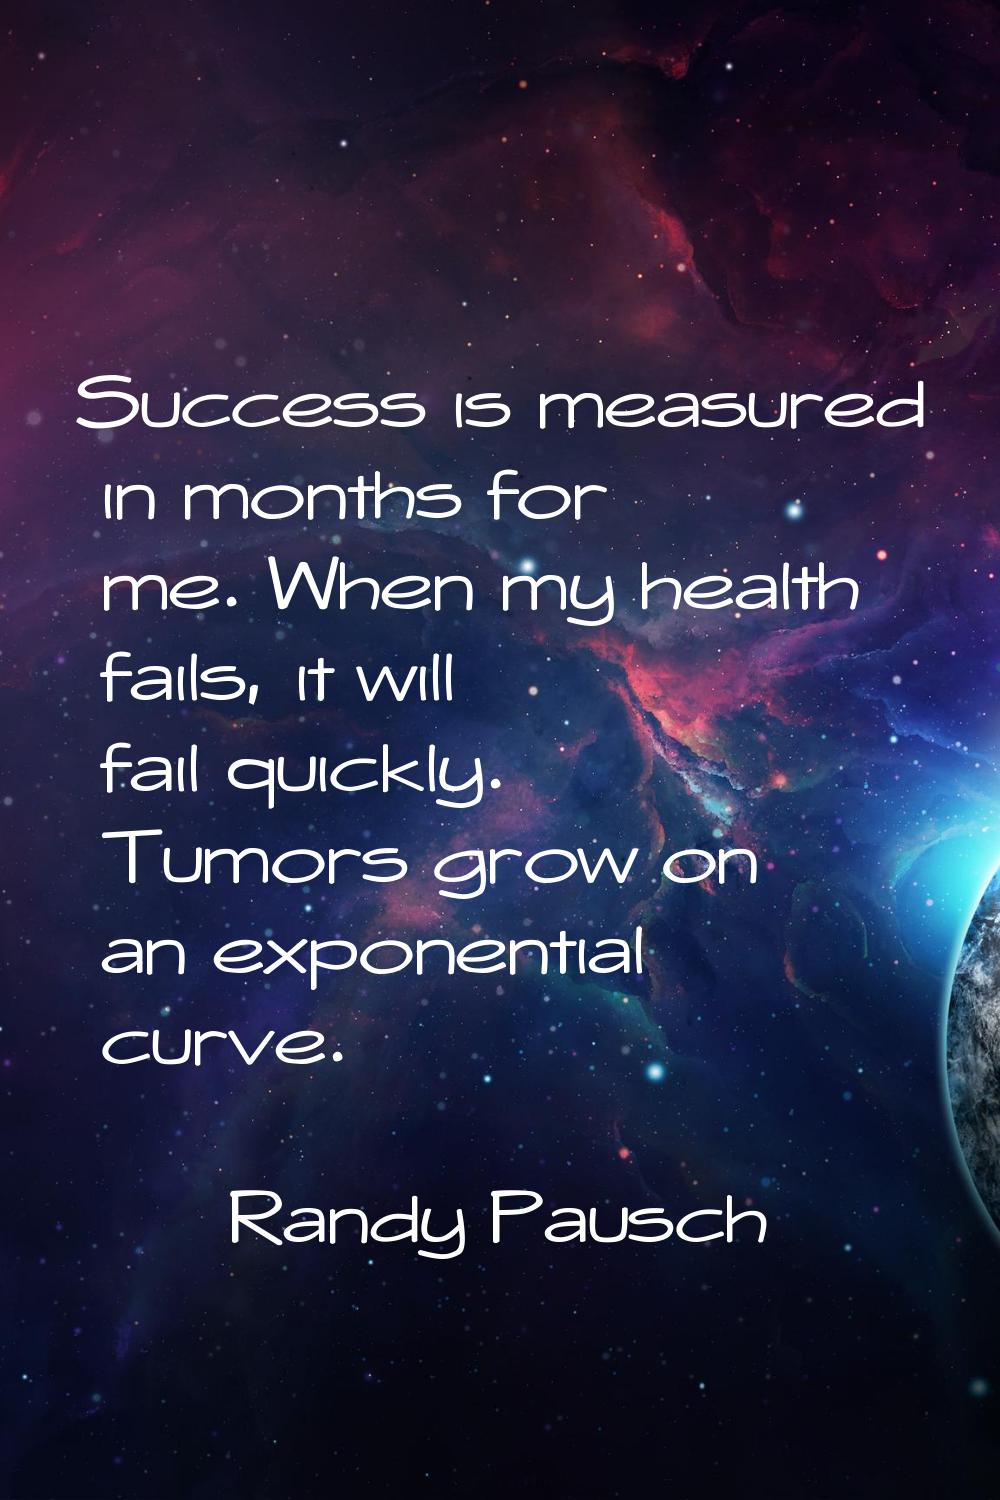 Success is measured in months for me. When my health fails, it will fail quickly. Tumors grow on an